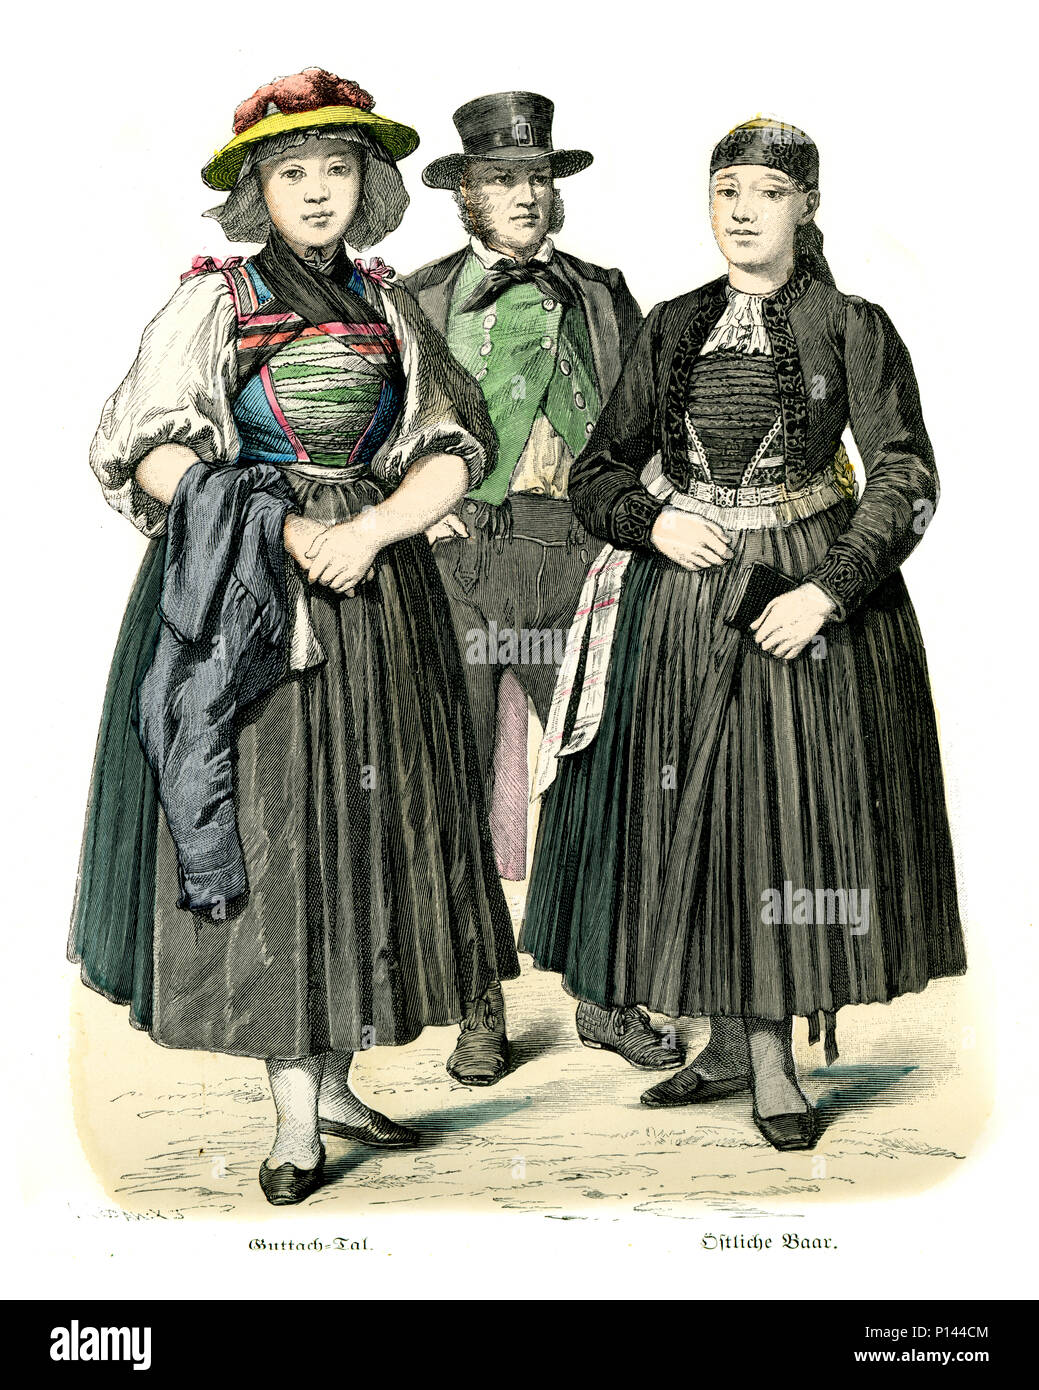 Vintage engraving of History of Fashion, Costumes of Germany Men and women of Baden 19th Century Stock Photo